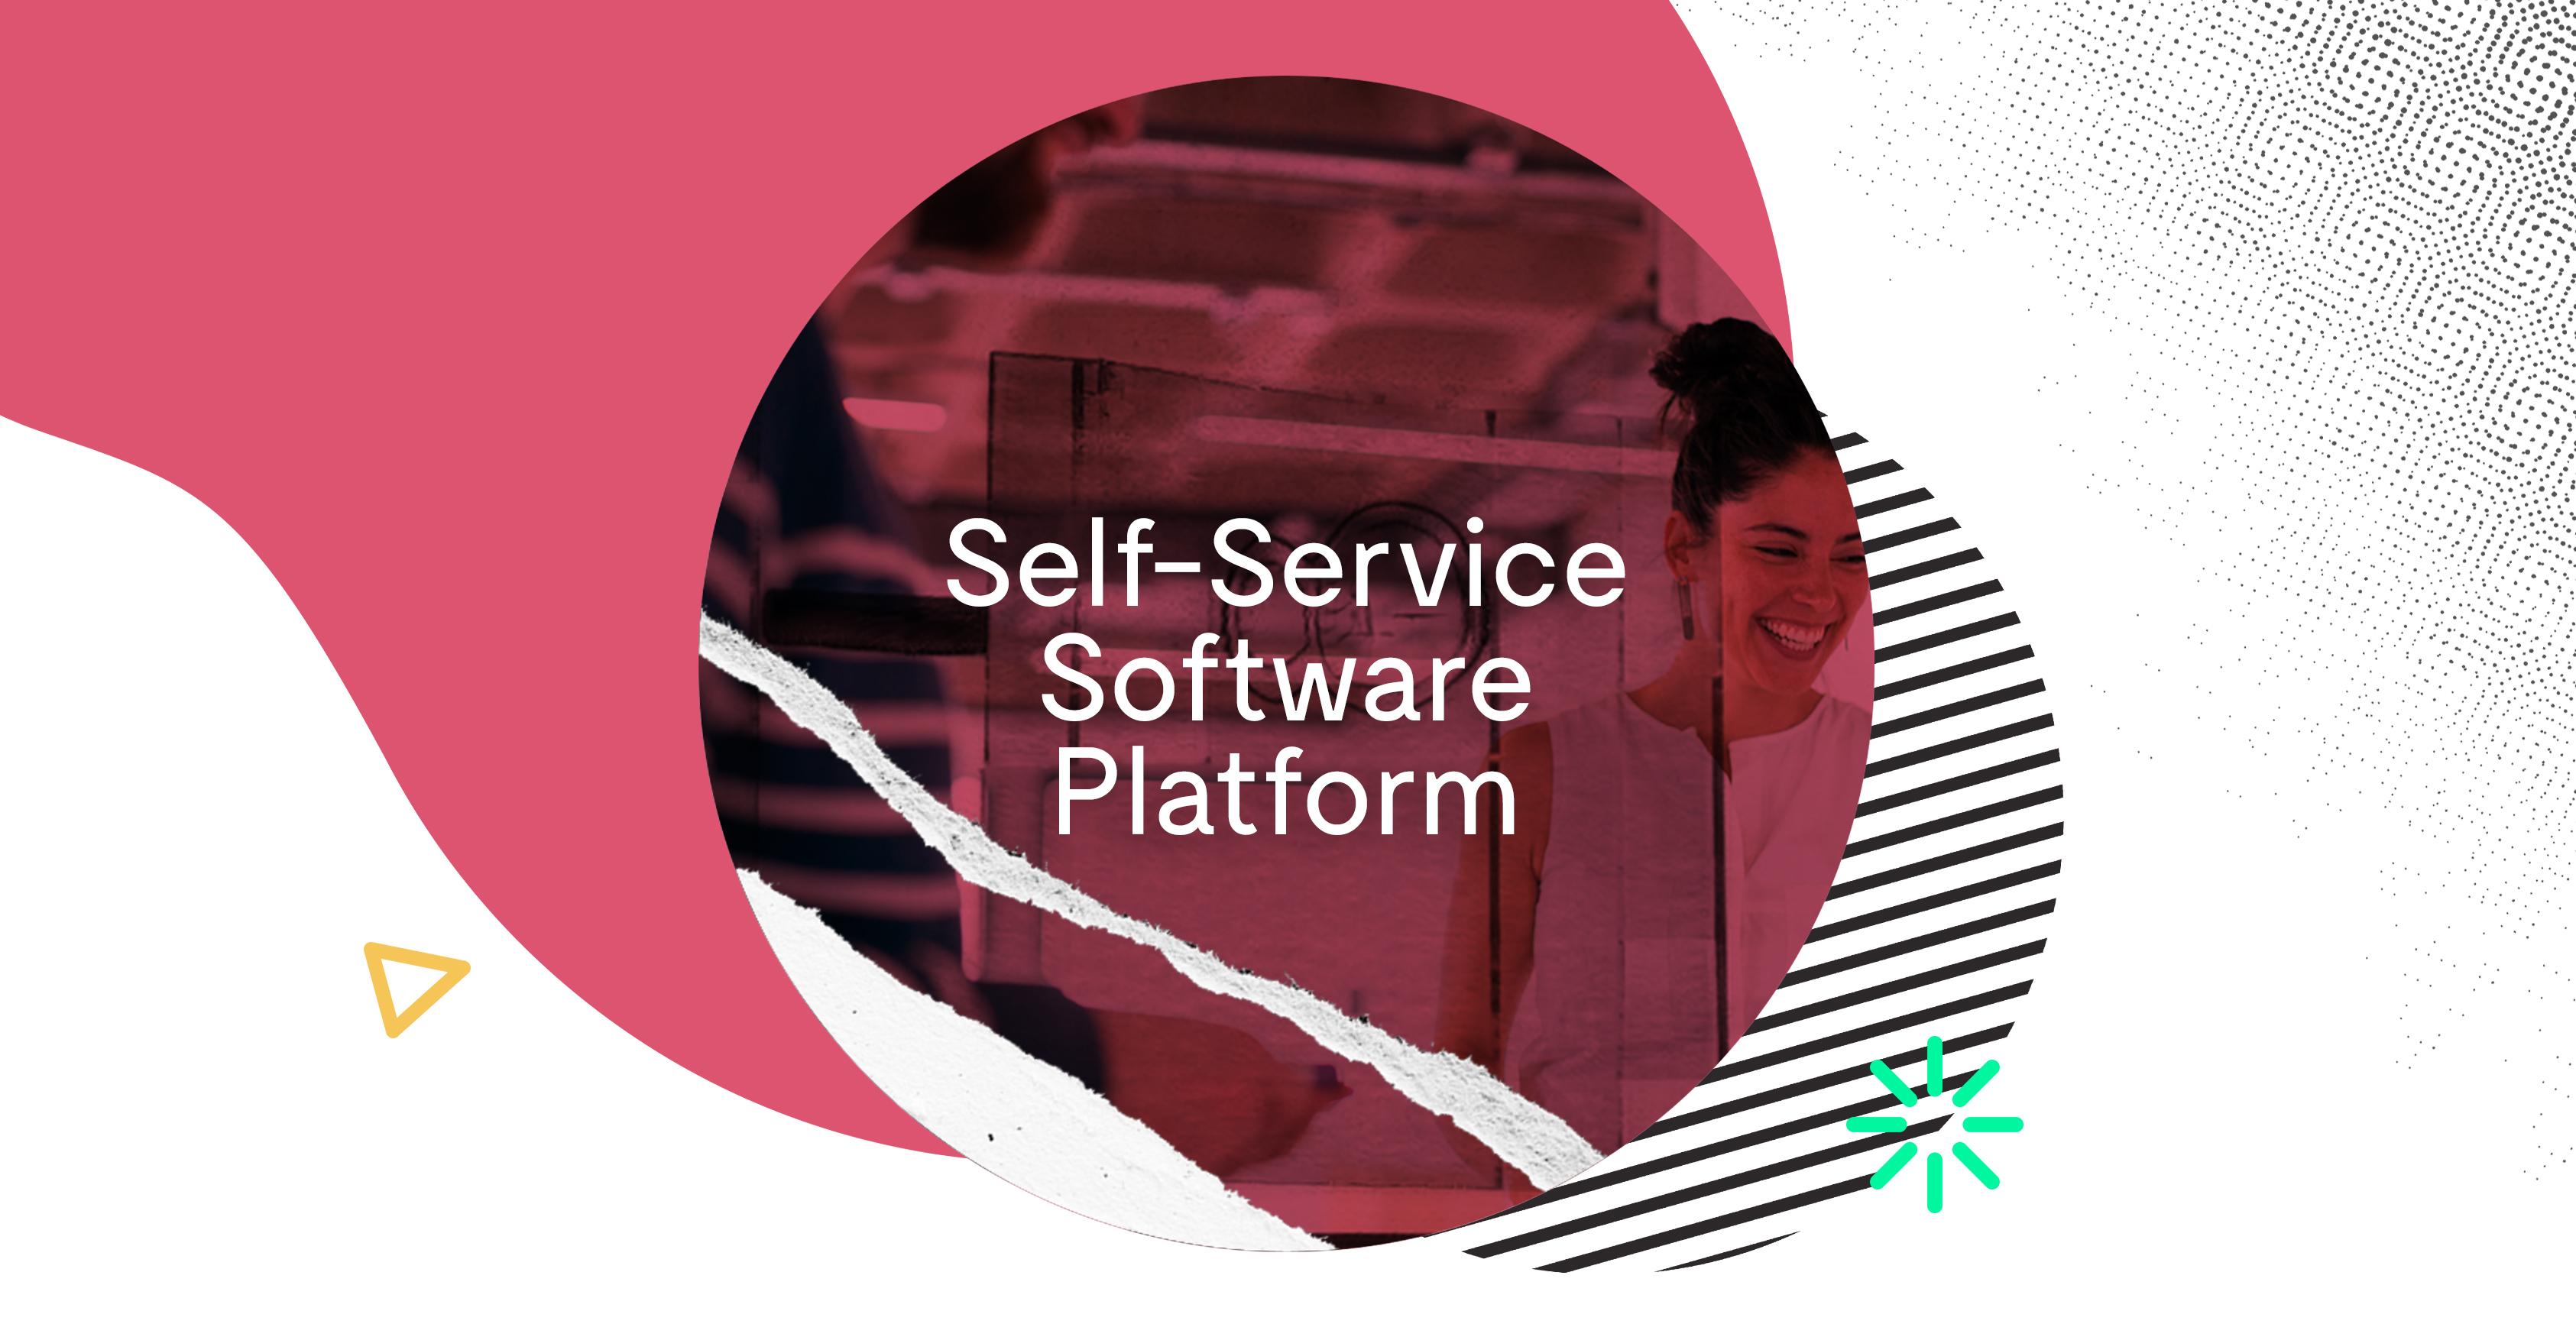 Product Self-Service Software image